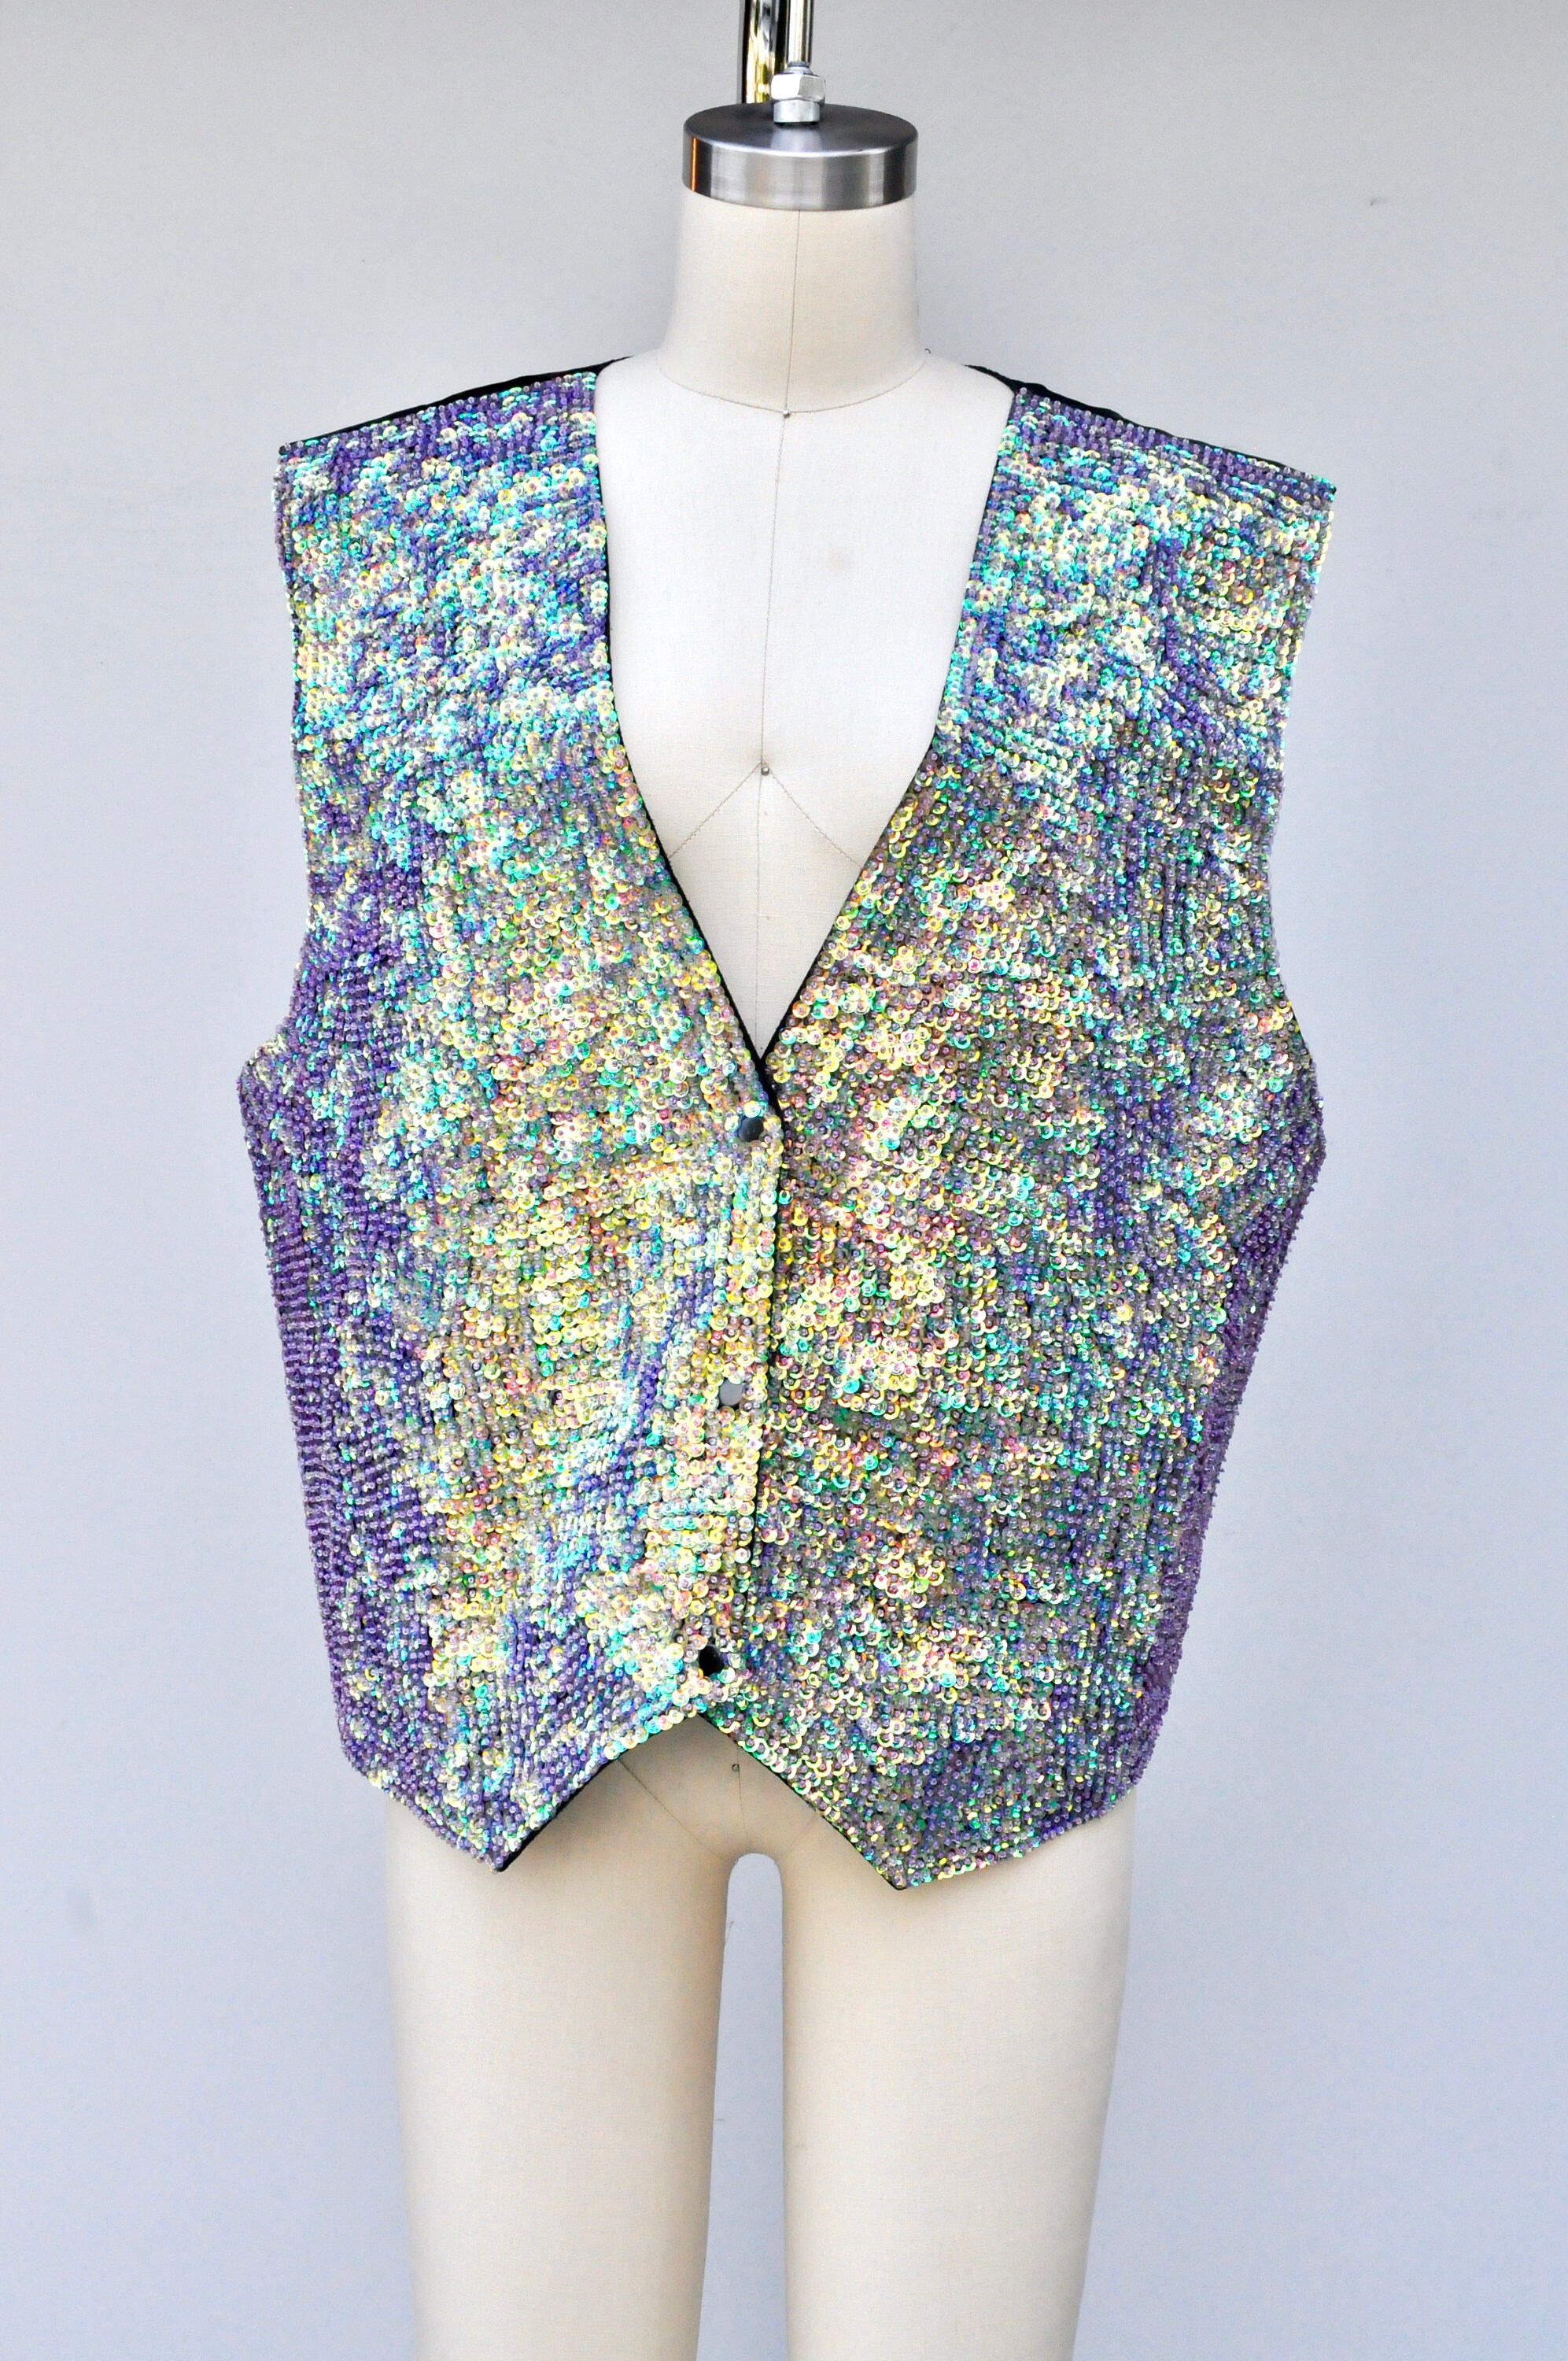 Vintage Heavily Sequined Vest Heavily Beaded and Sequined | Etsy